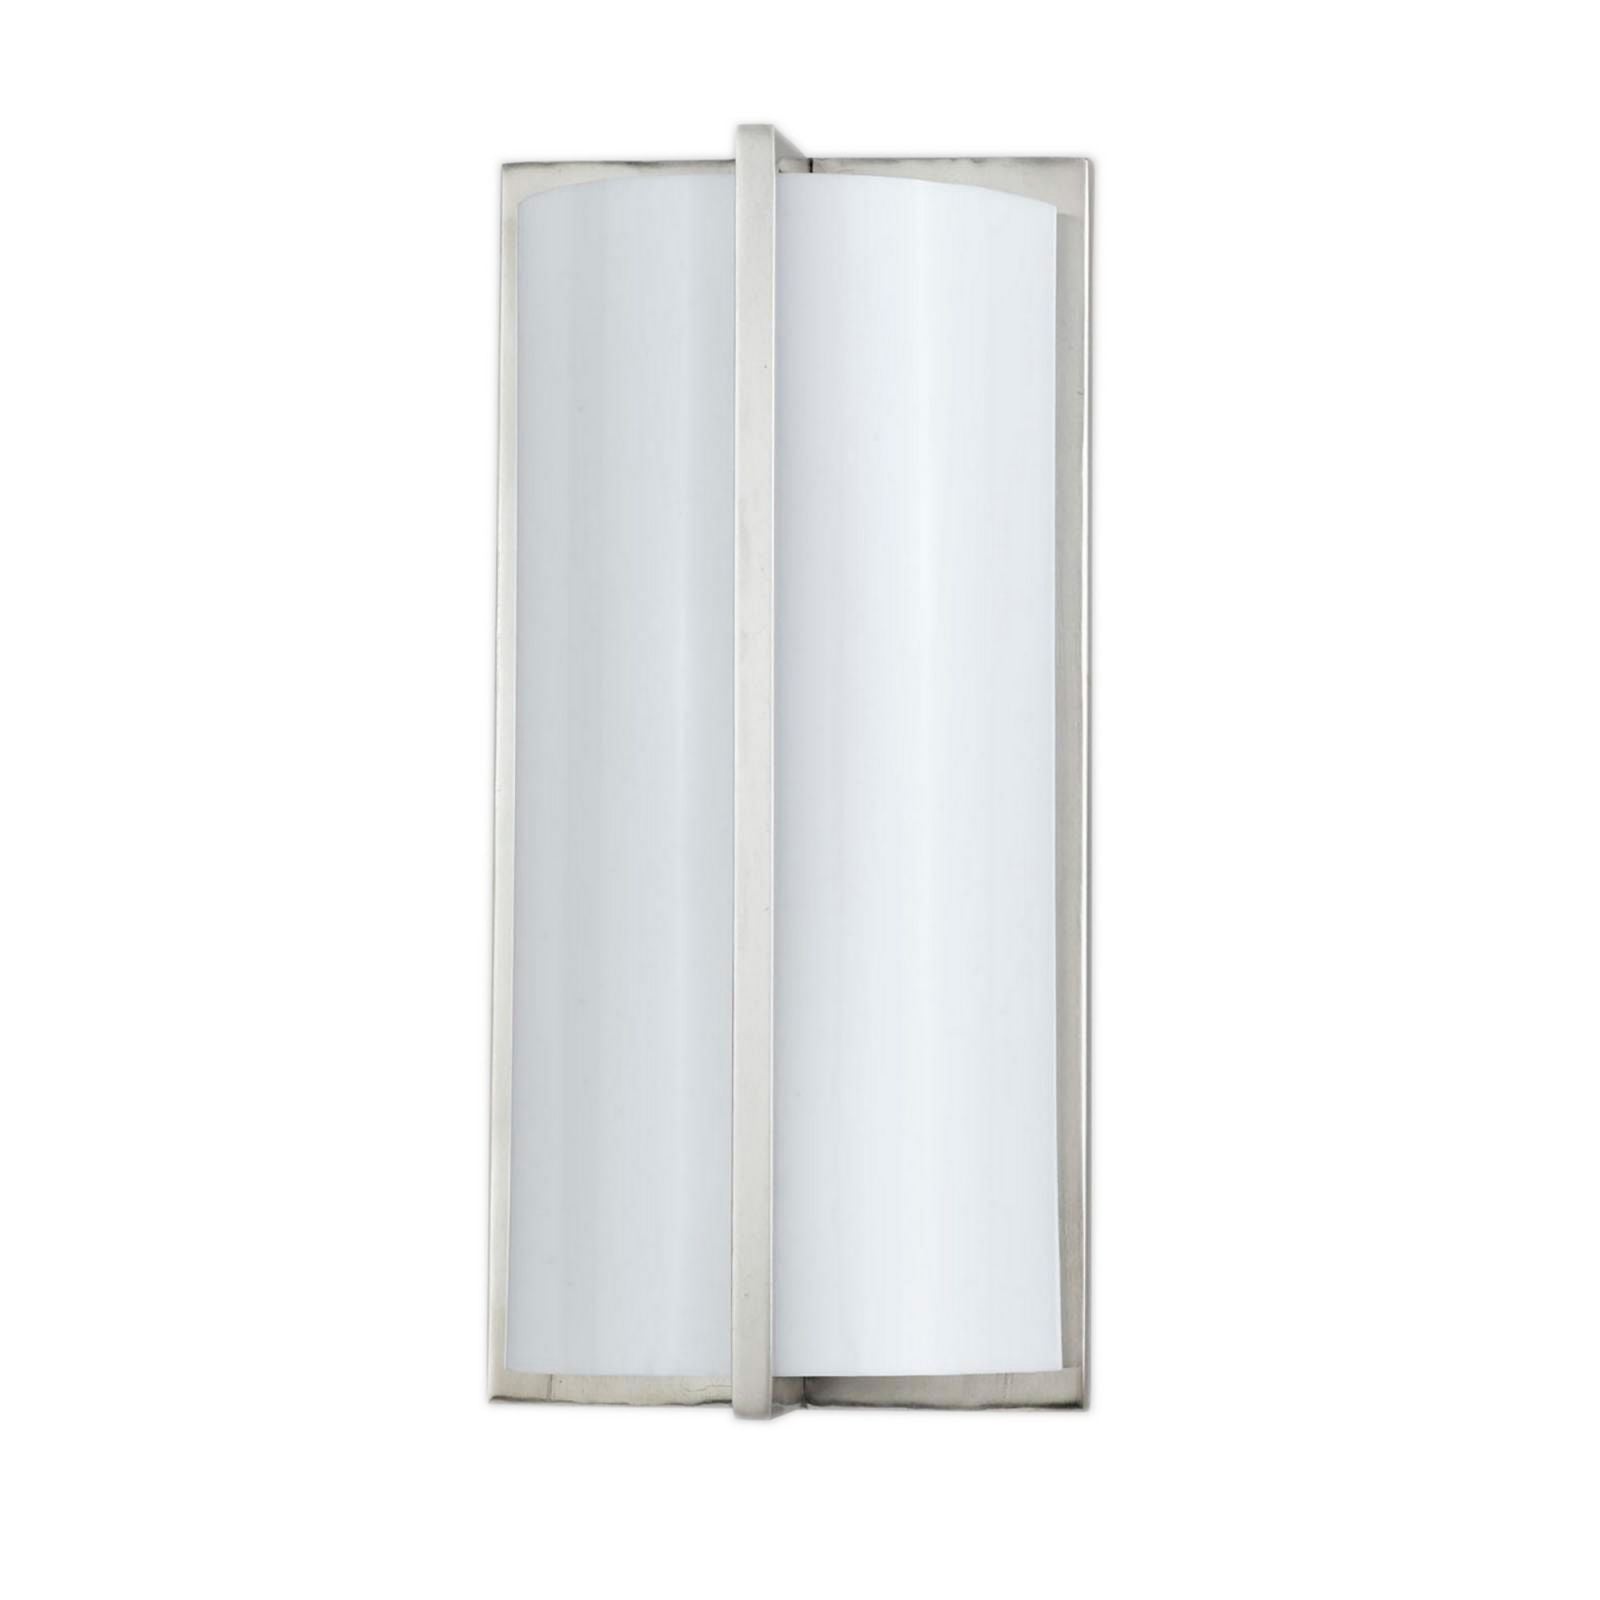 Benzara Cylindrical Shape Plc Wall Lamp With 3D Design, Set Of 4, Silver And White By Benzara Wall Lamps BM220707